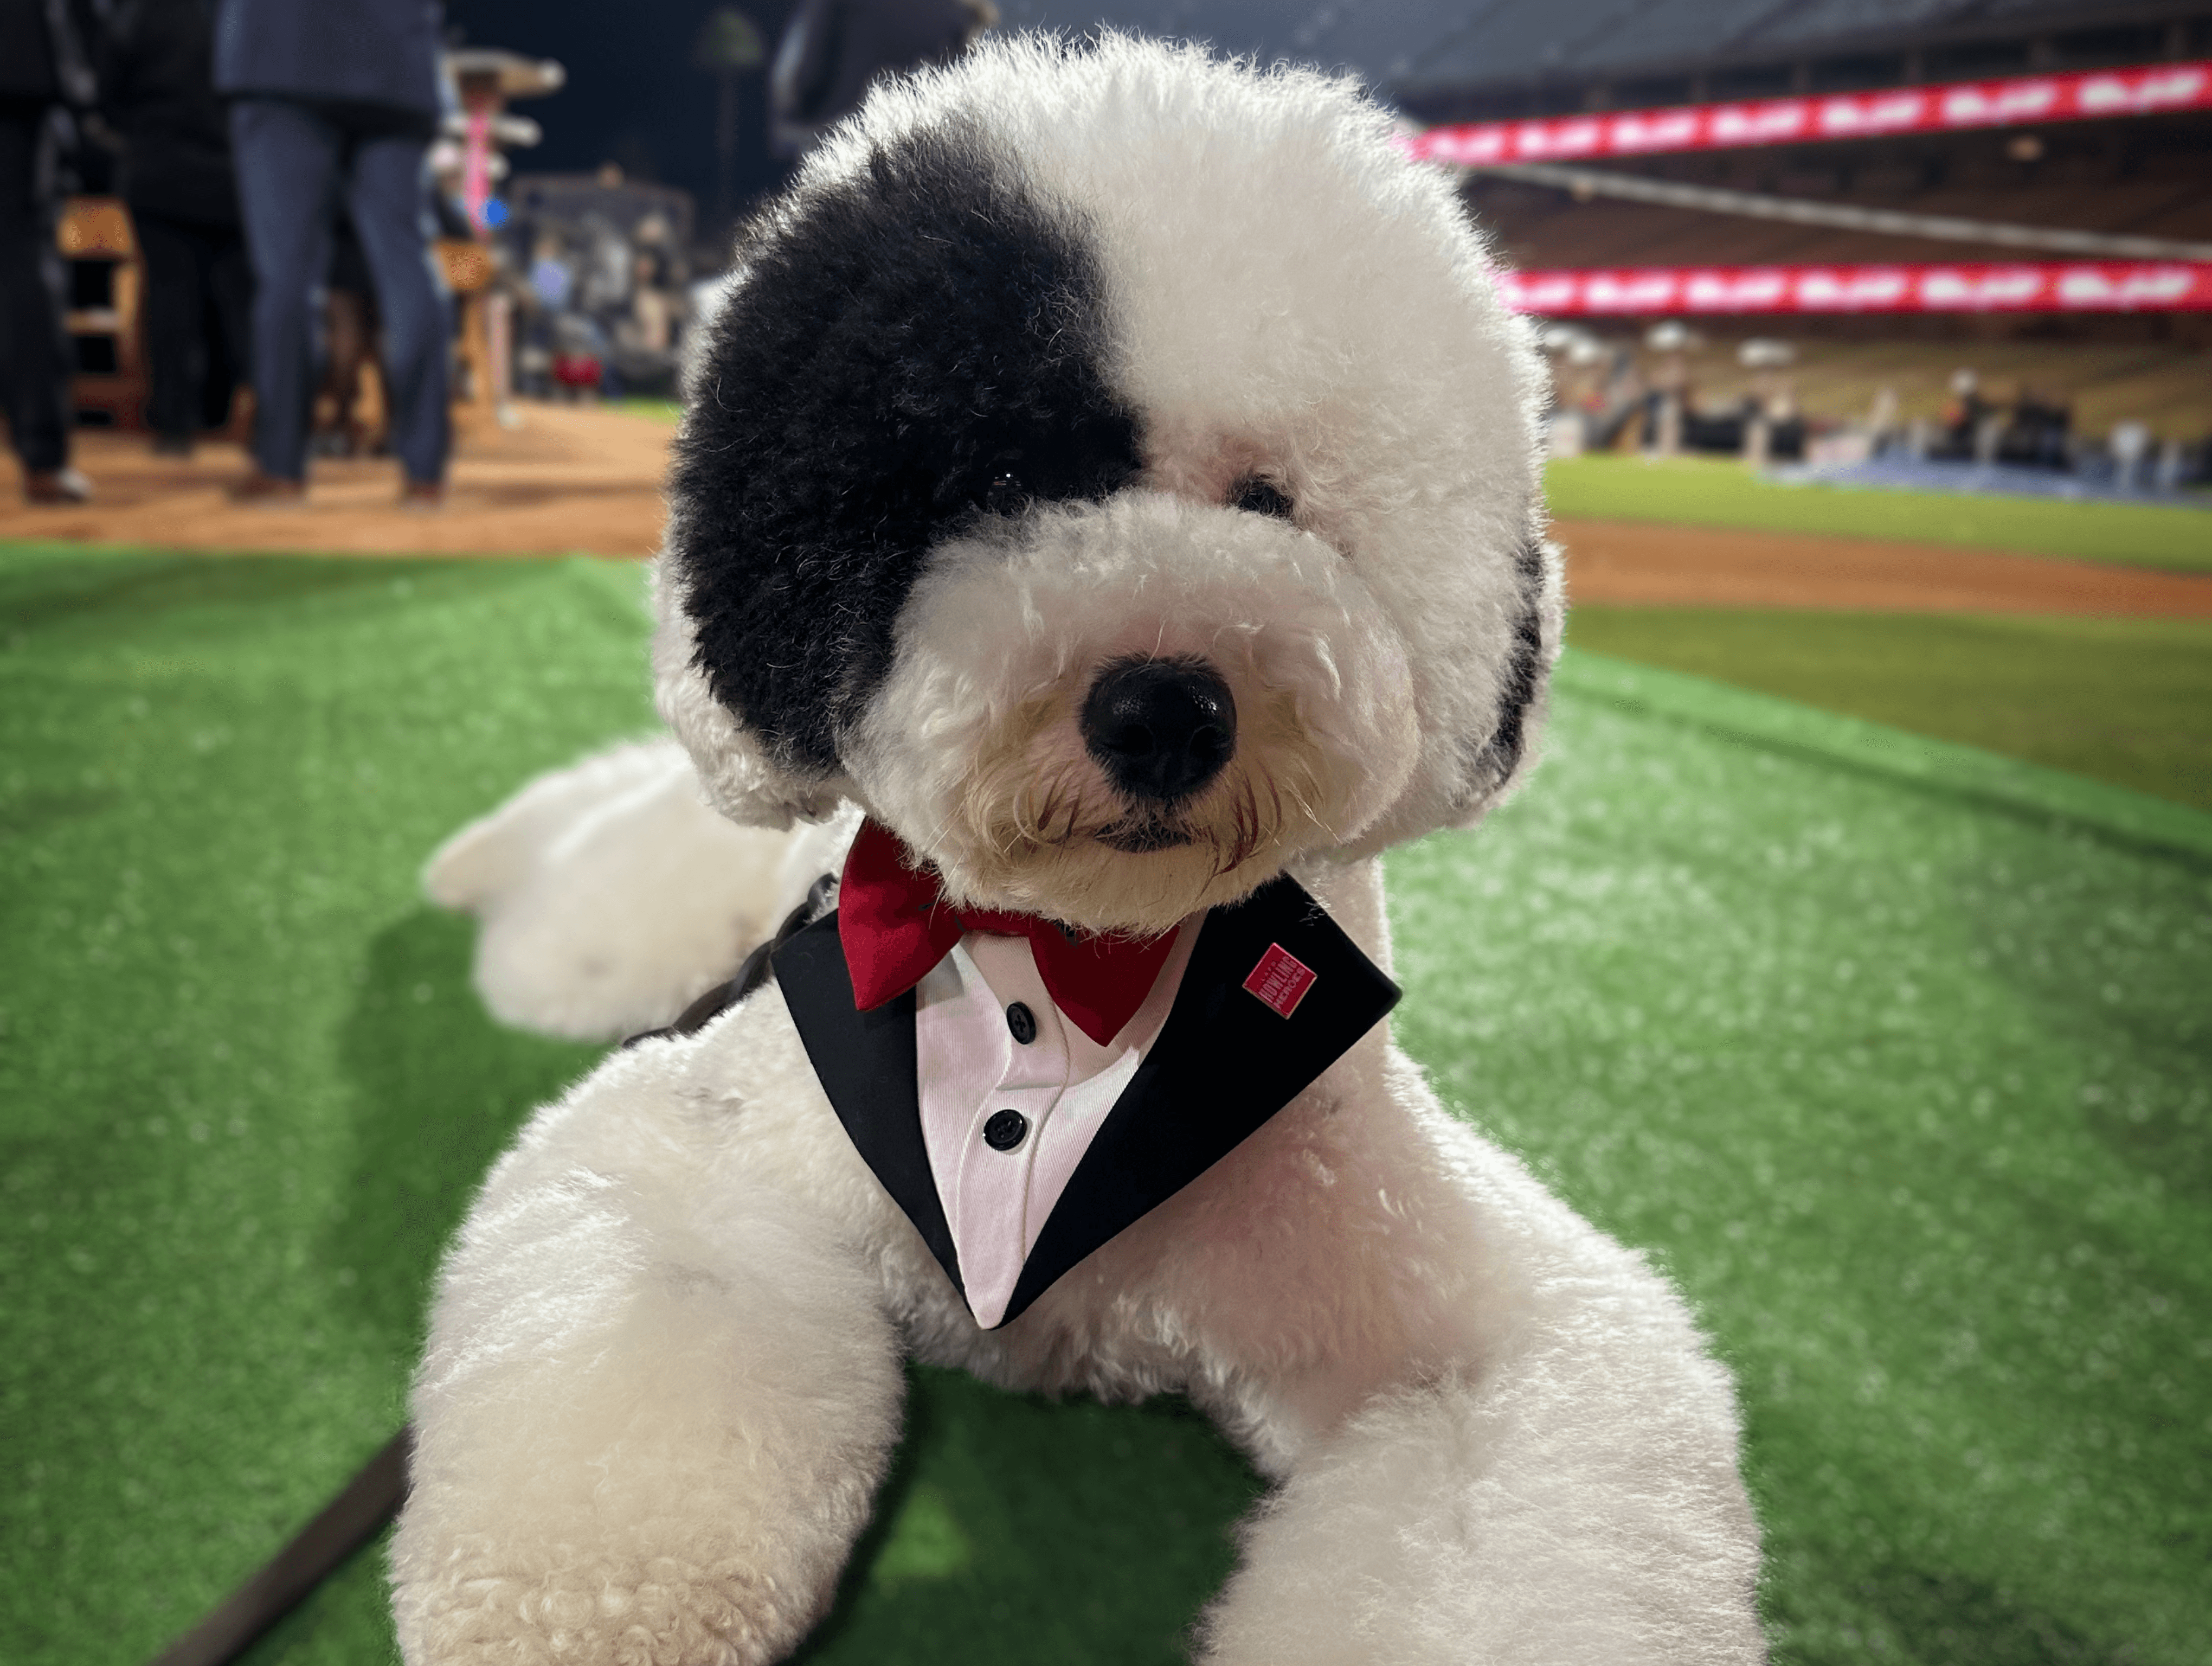 Picture of Sampson, a black and white sheepadoodle, in a dog-sized tuxedo shirt.